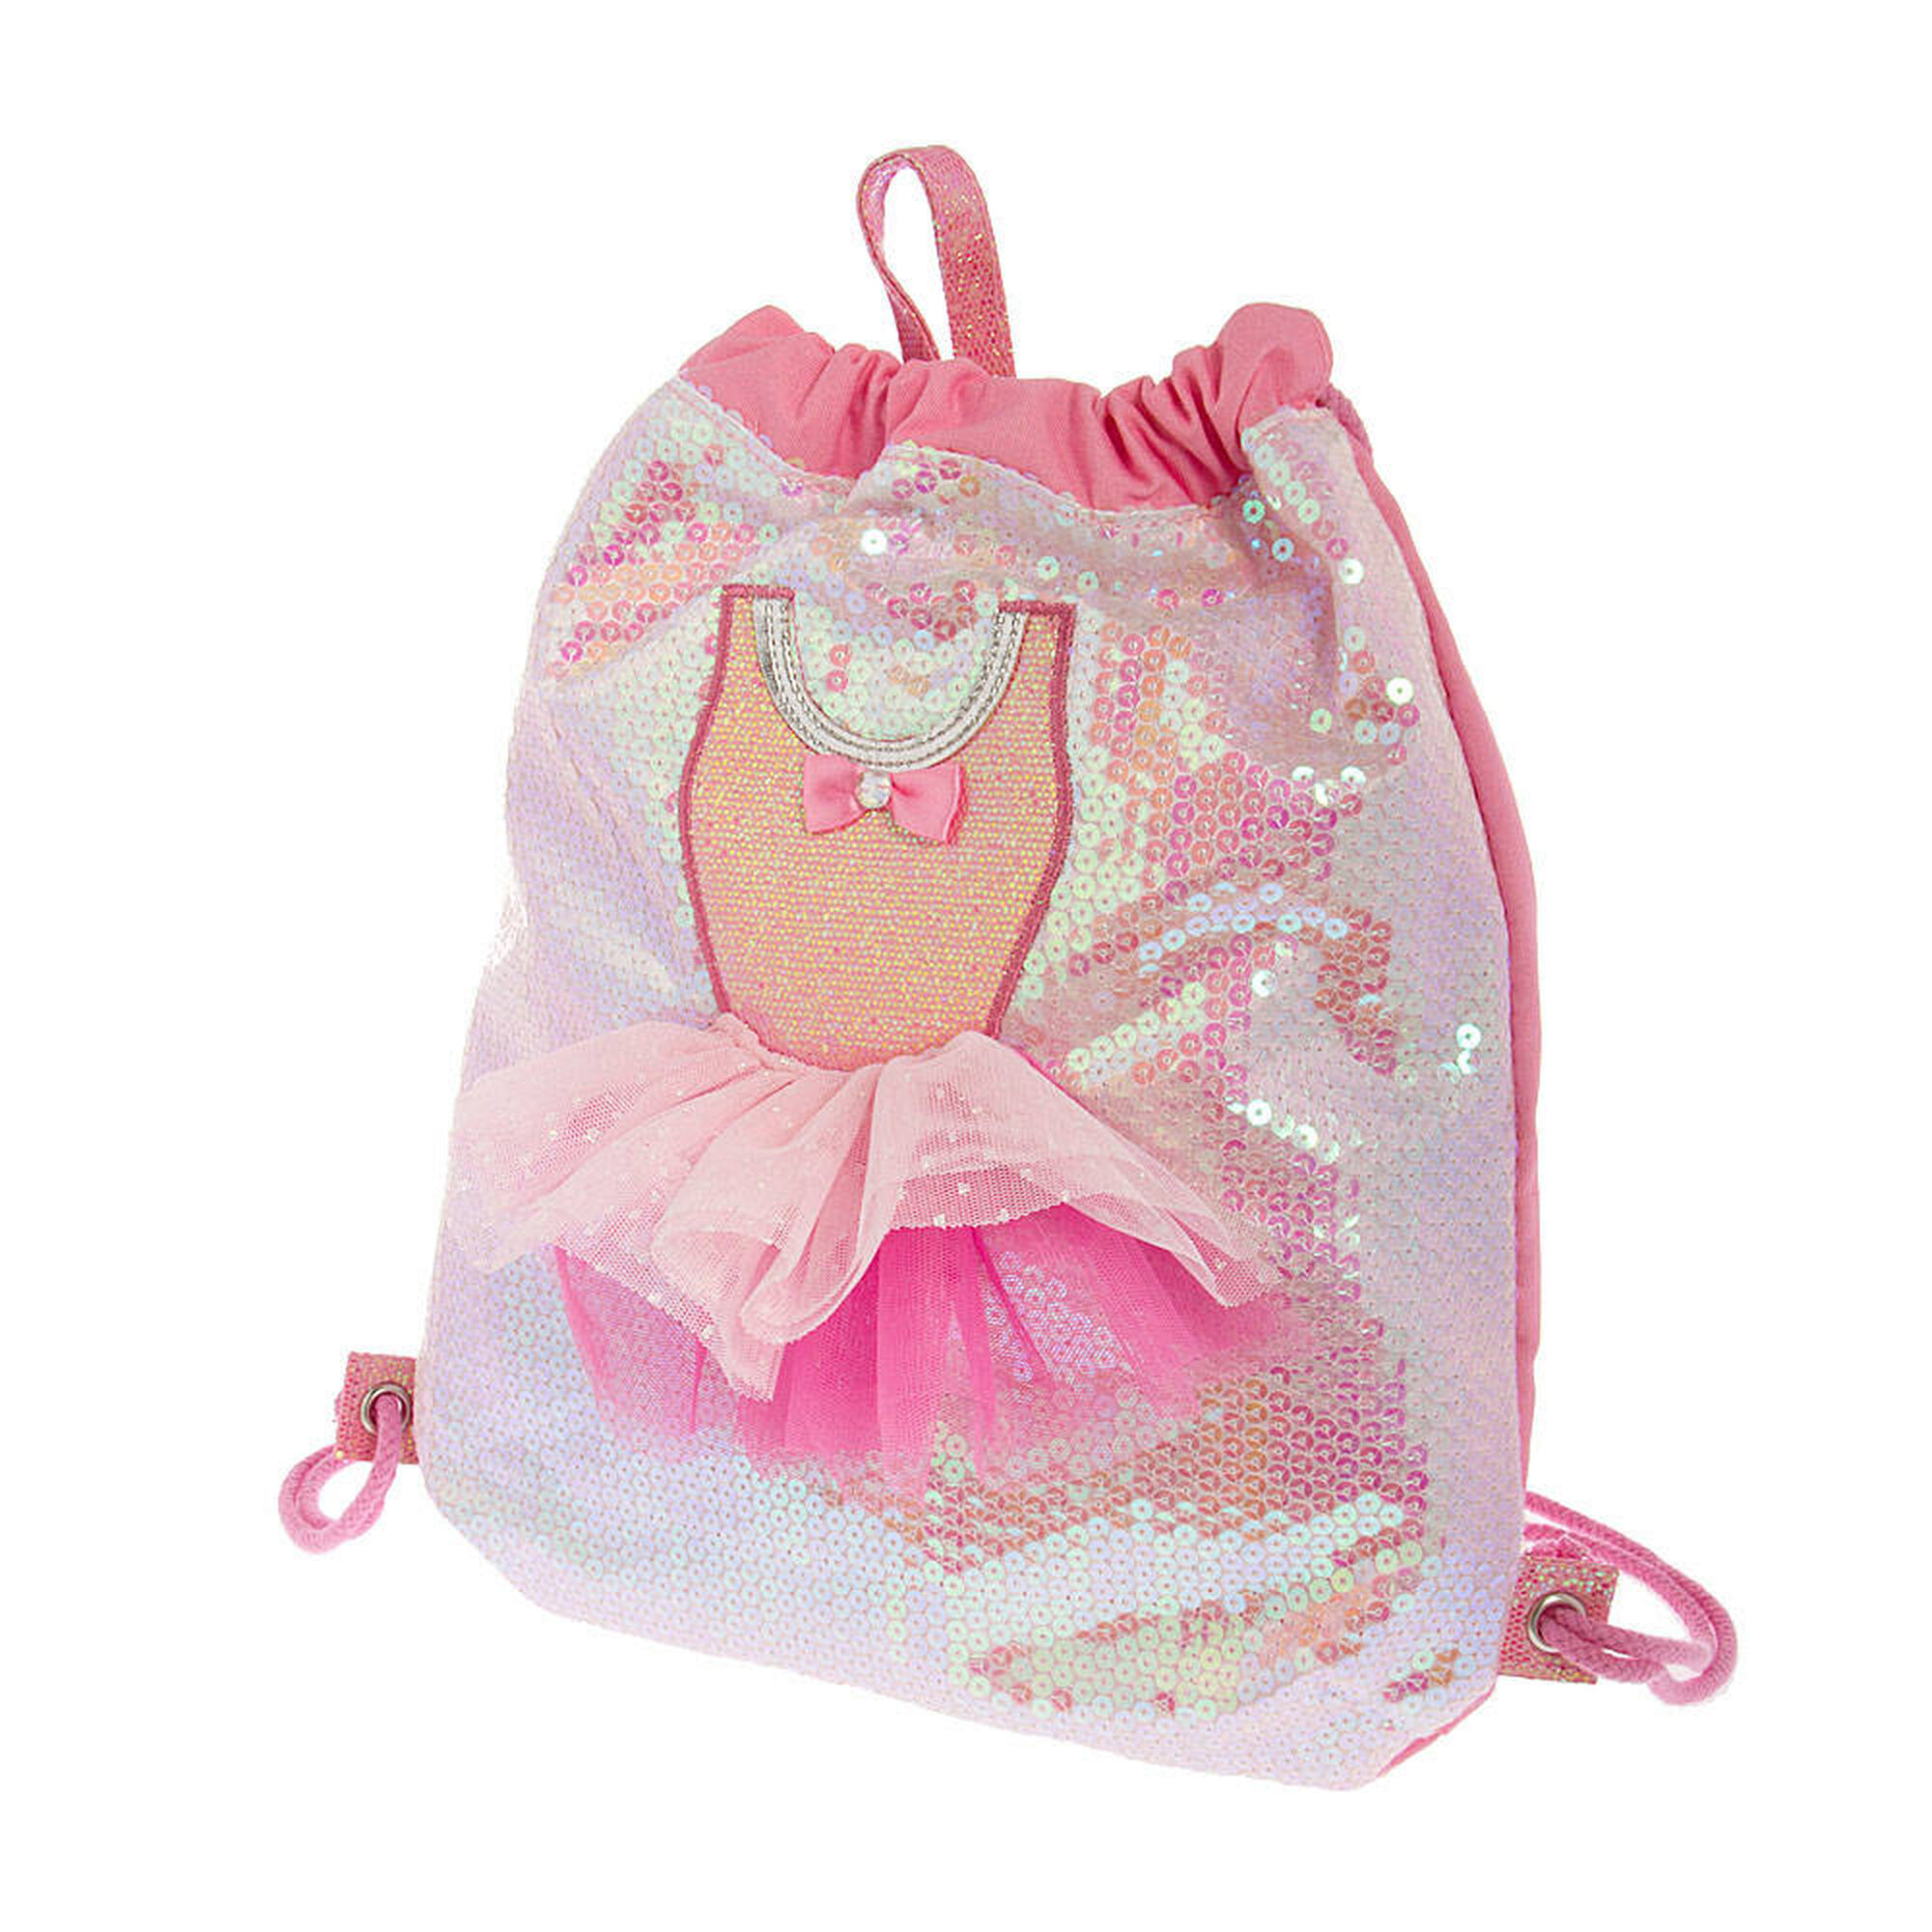 Claire's Club Ballerina Dress Sequin Drawstring Bag - Pink | Claire's US